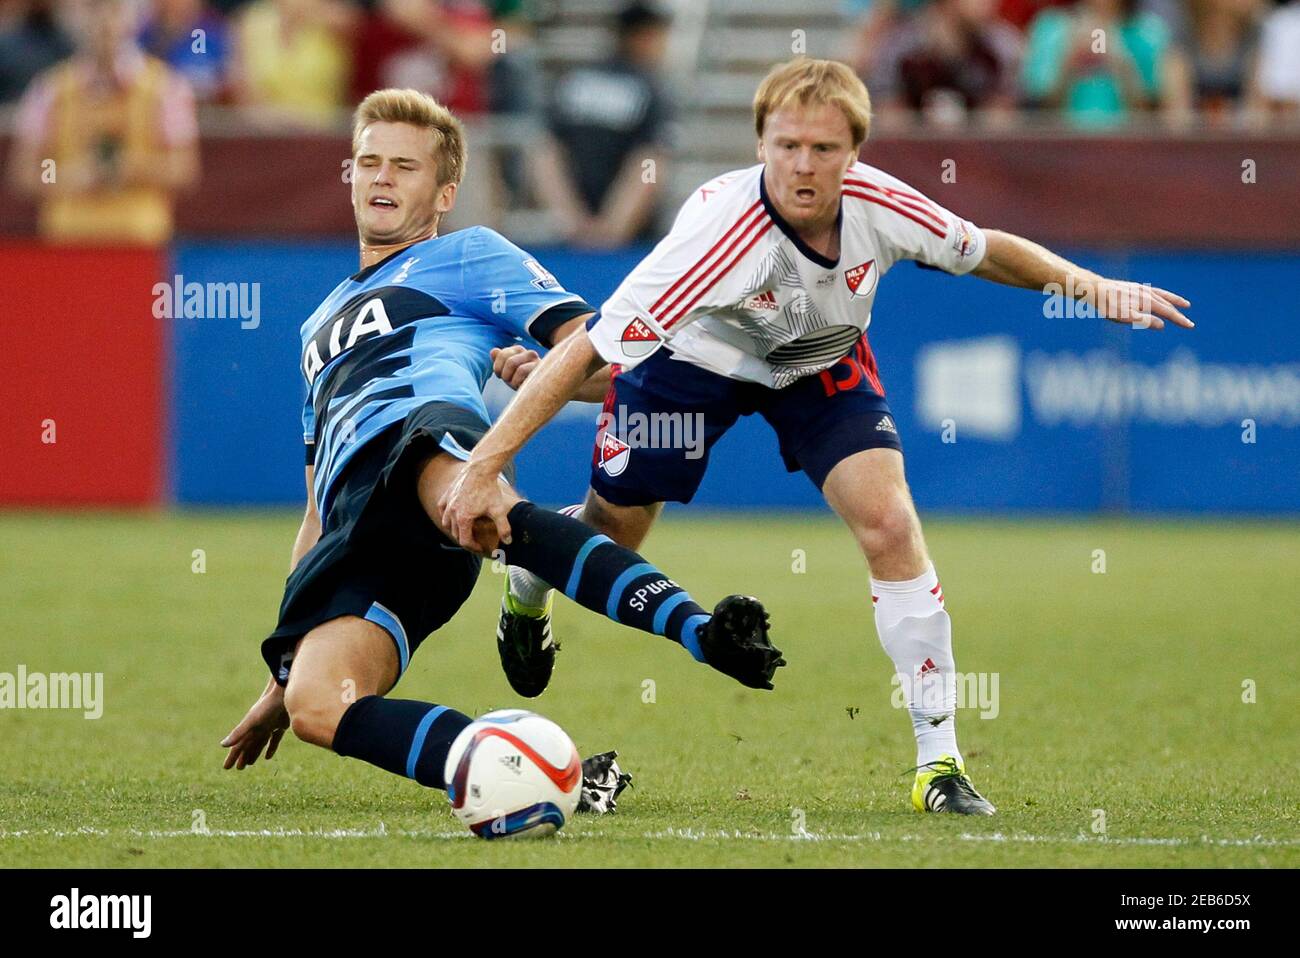 Football - MLS All-Stars v Tottenham Hotspur - AT&T MLS All Stars Game - Pre Season Friendly - Dick's Sporting Goods Park, Colorado, United States of America - 29/7/15  Tottenham's Eric Dier (L) in action with MLS All-Star's Dax McCarty  Action Images via Reuters / Rick Wilking  Livepic Stock Photo